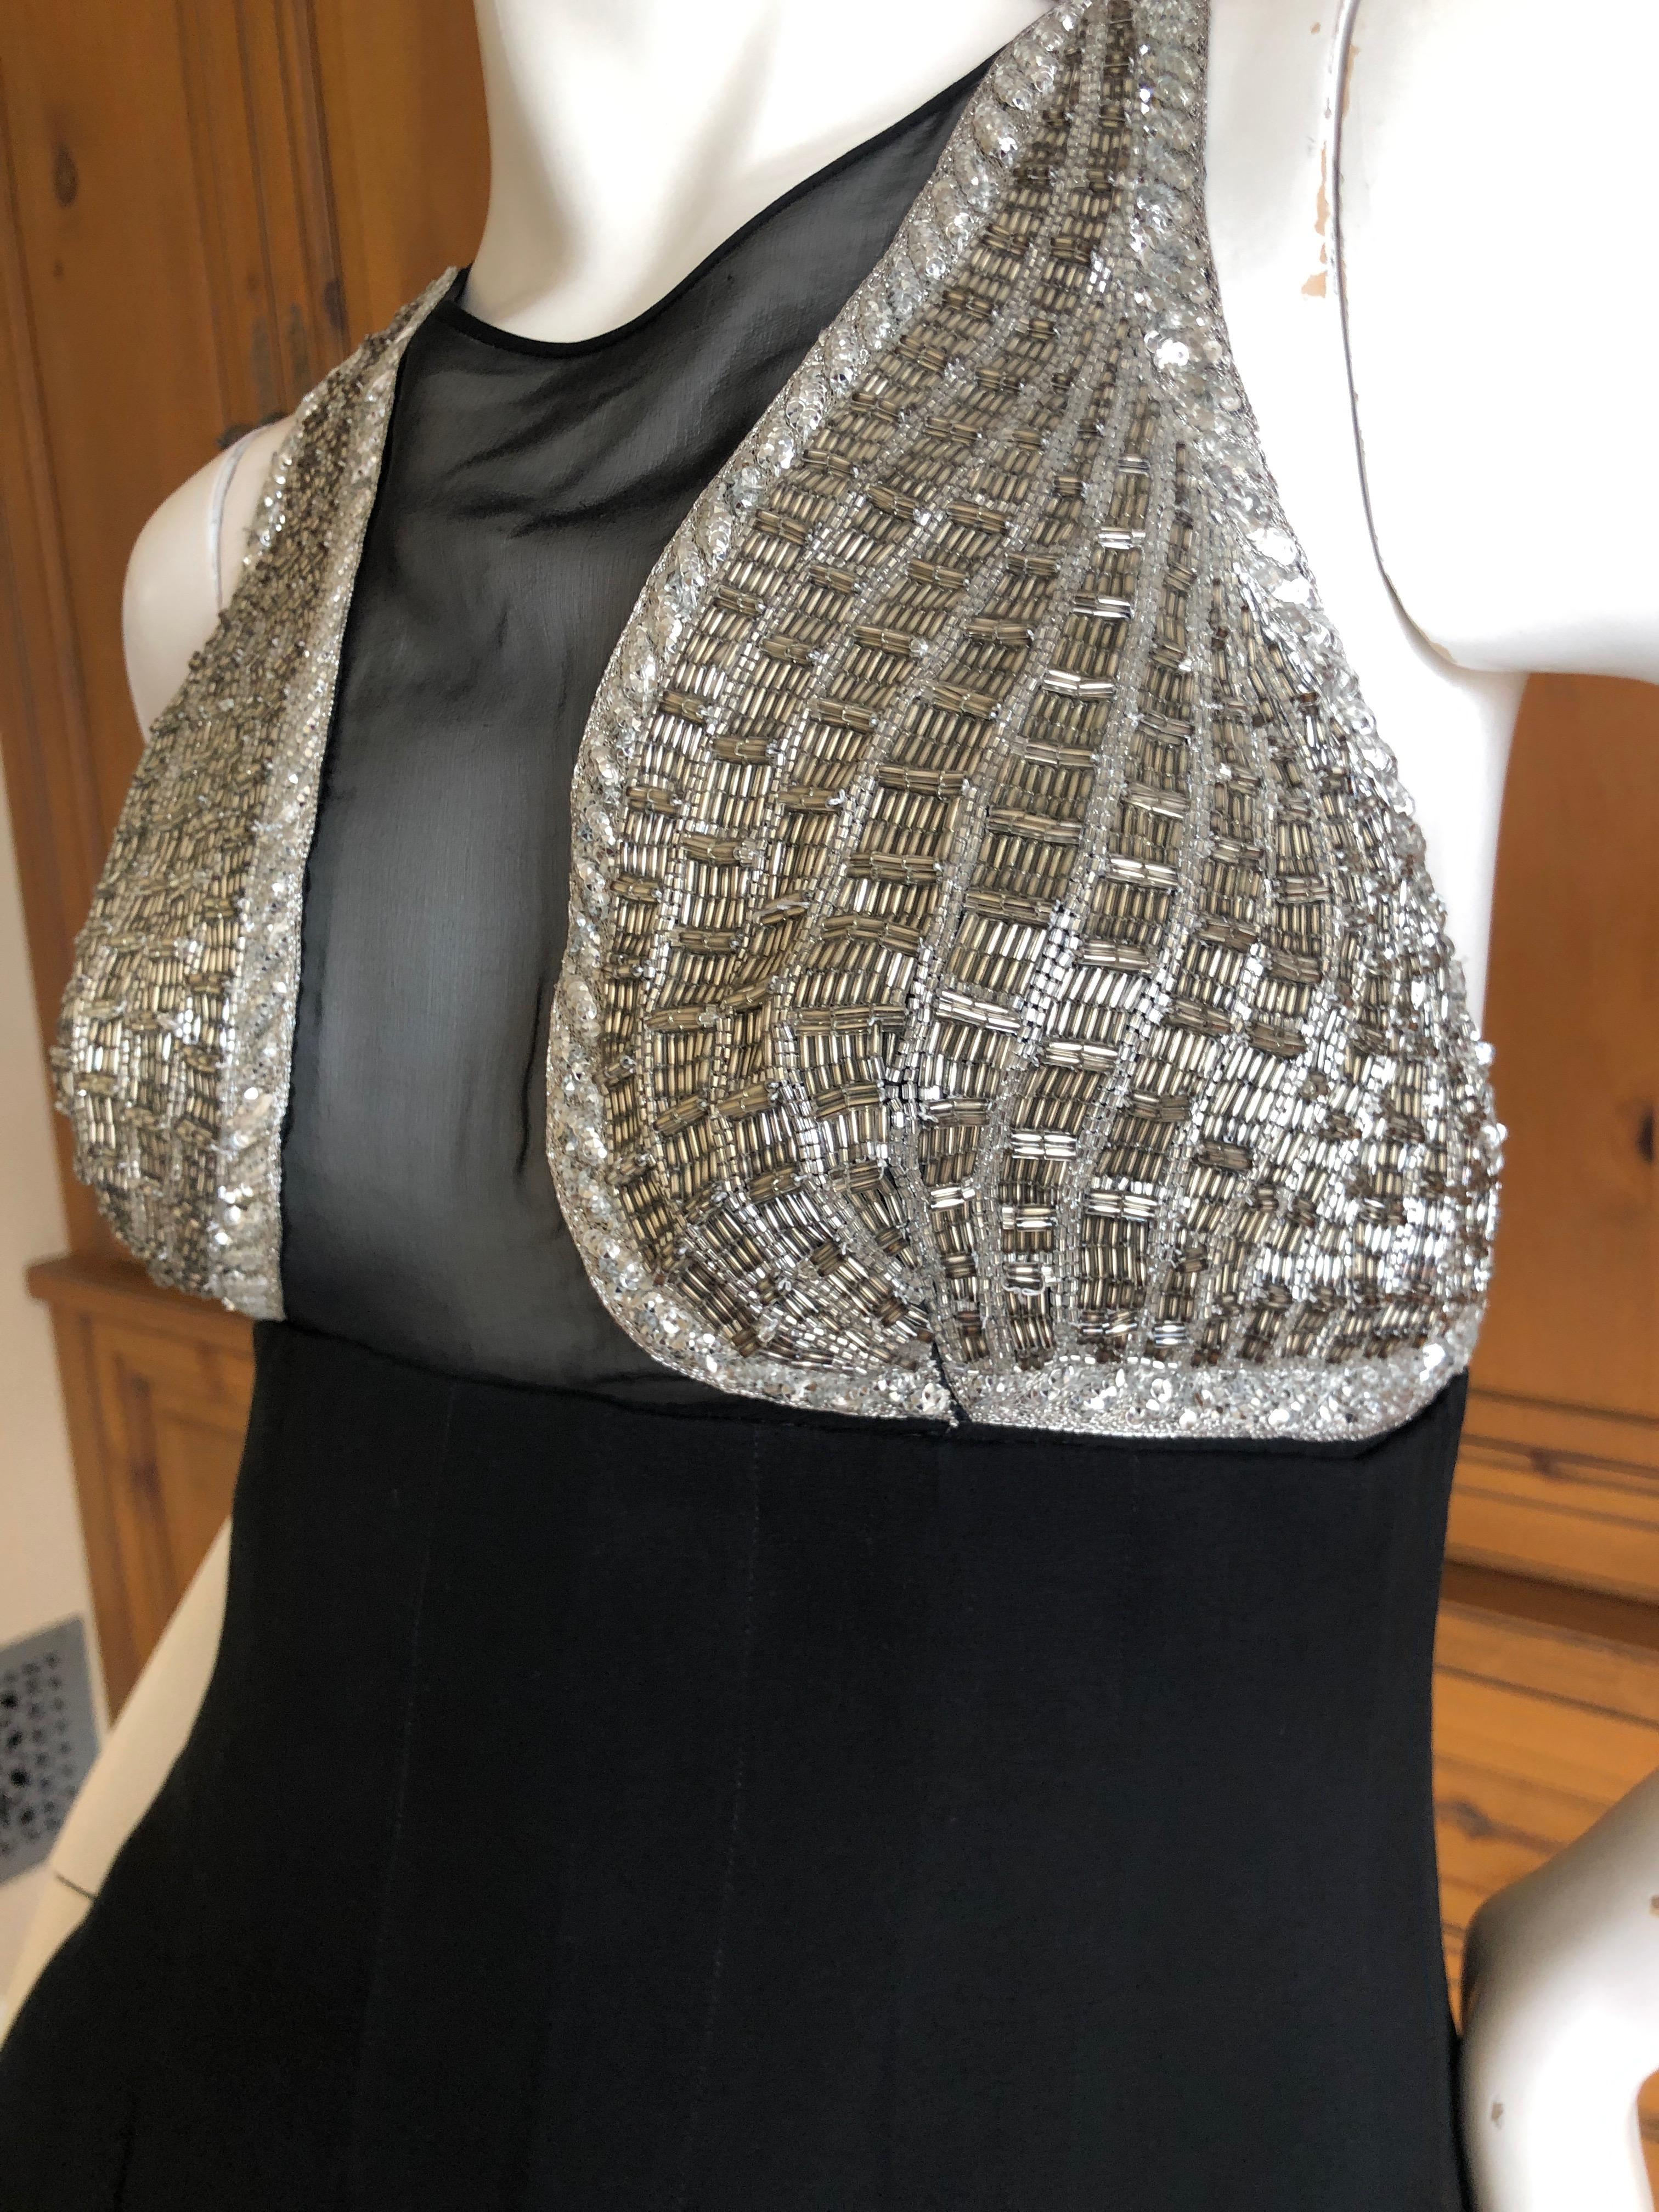 Karl Lagerfeld 1984 Lesage Sequin Embellished Mini Dress In Excellent Condition For Sale In Cloverdale, CA